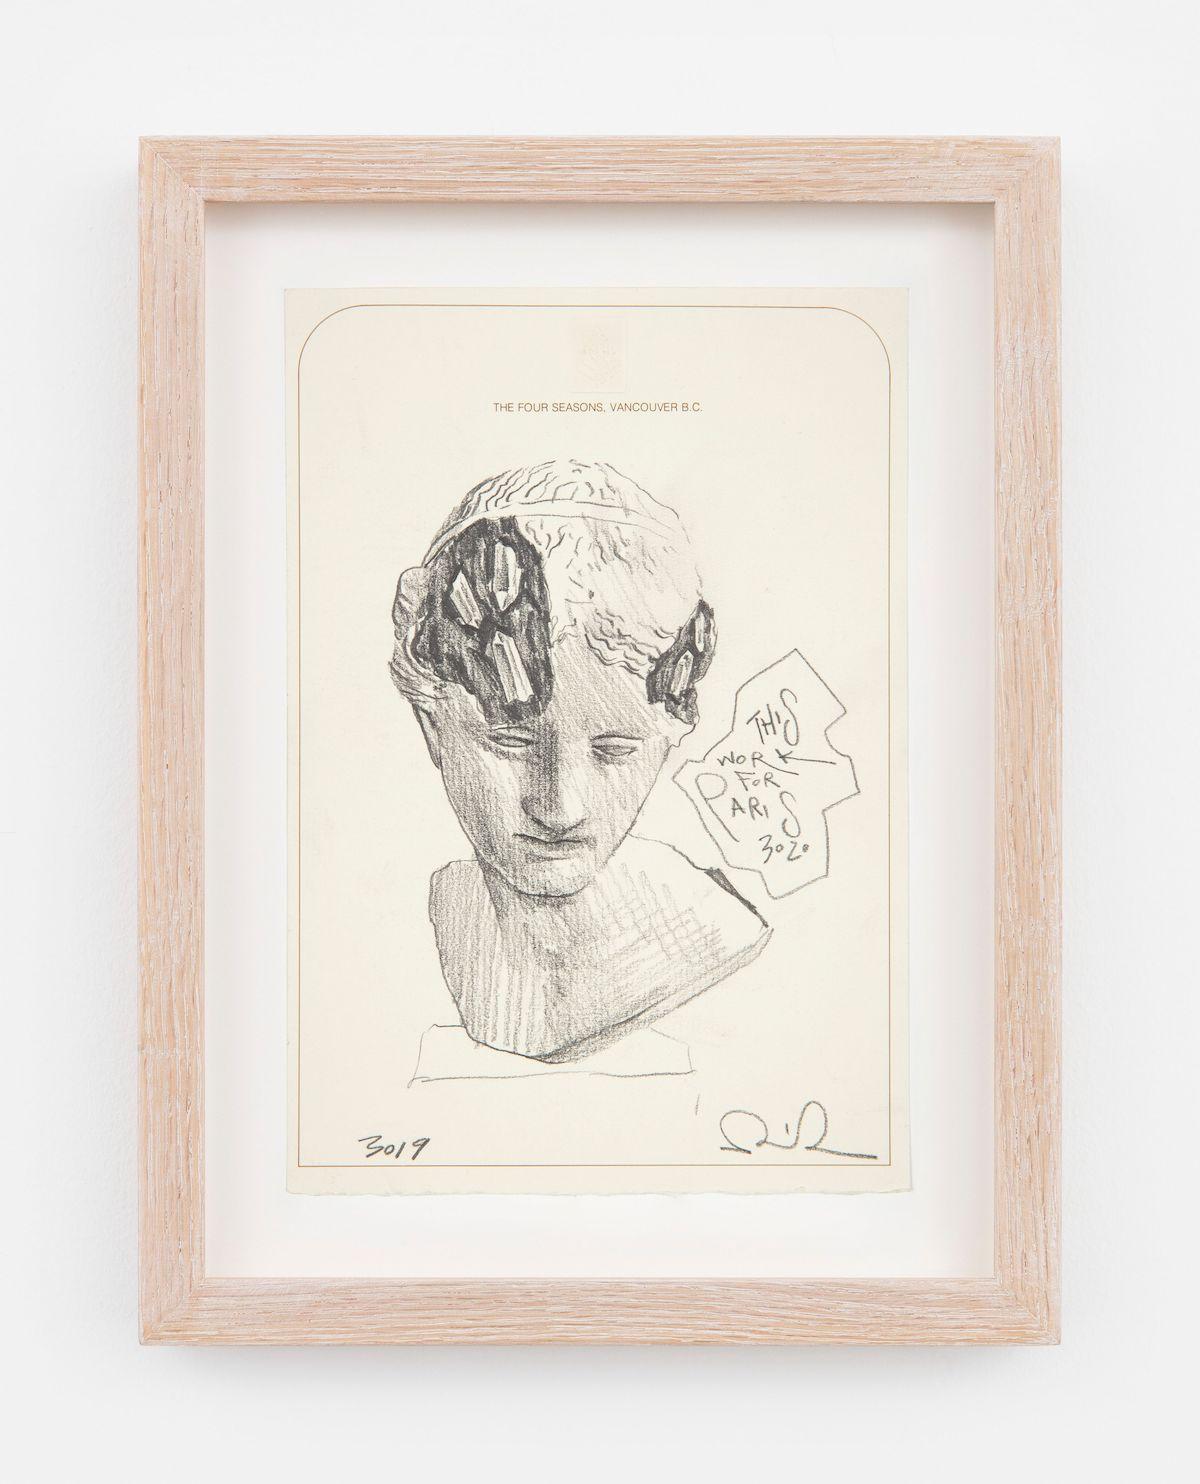 Daniel Arsham, The Four Seasons Vancouver: Study for Eroded Bust of Venus of Arles, 2023. Graphite on paper. 8 7/8 x 6 1/8 inch. Photo: Guillaume Ziccarelli. Courtesy of the artist and Perrotin.